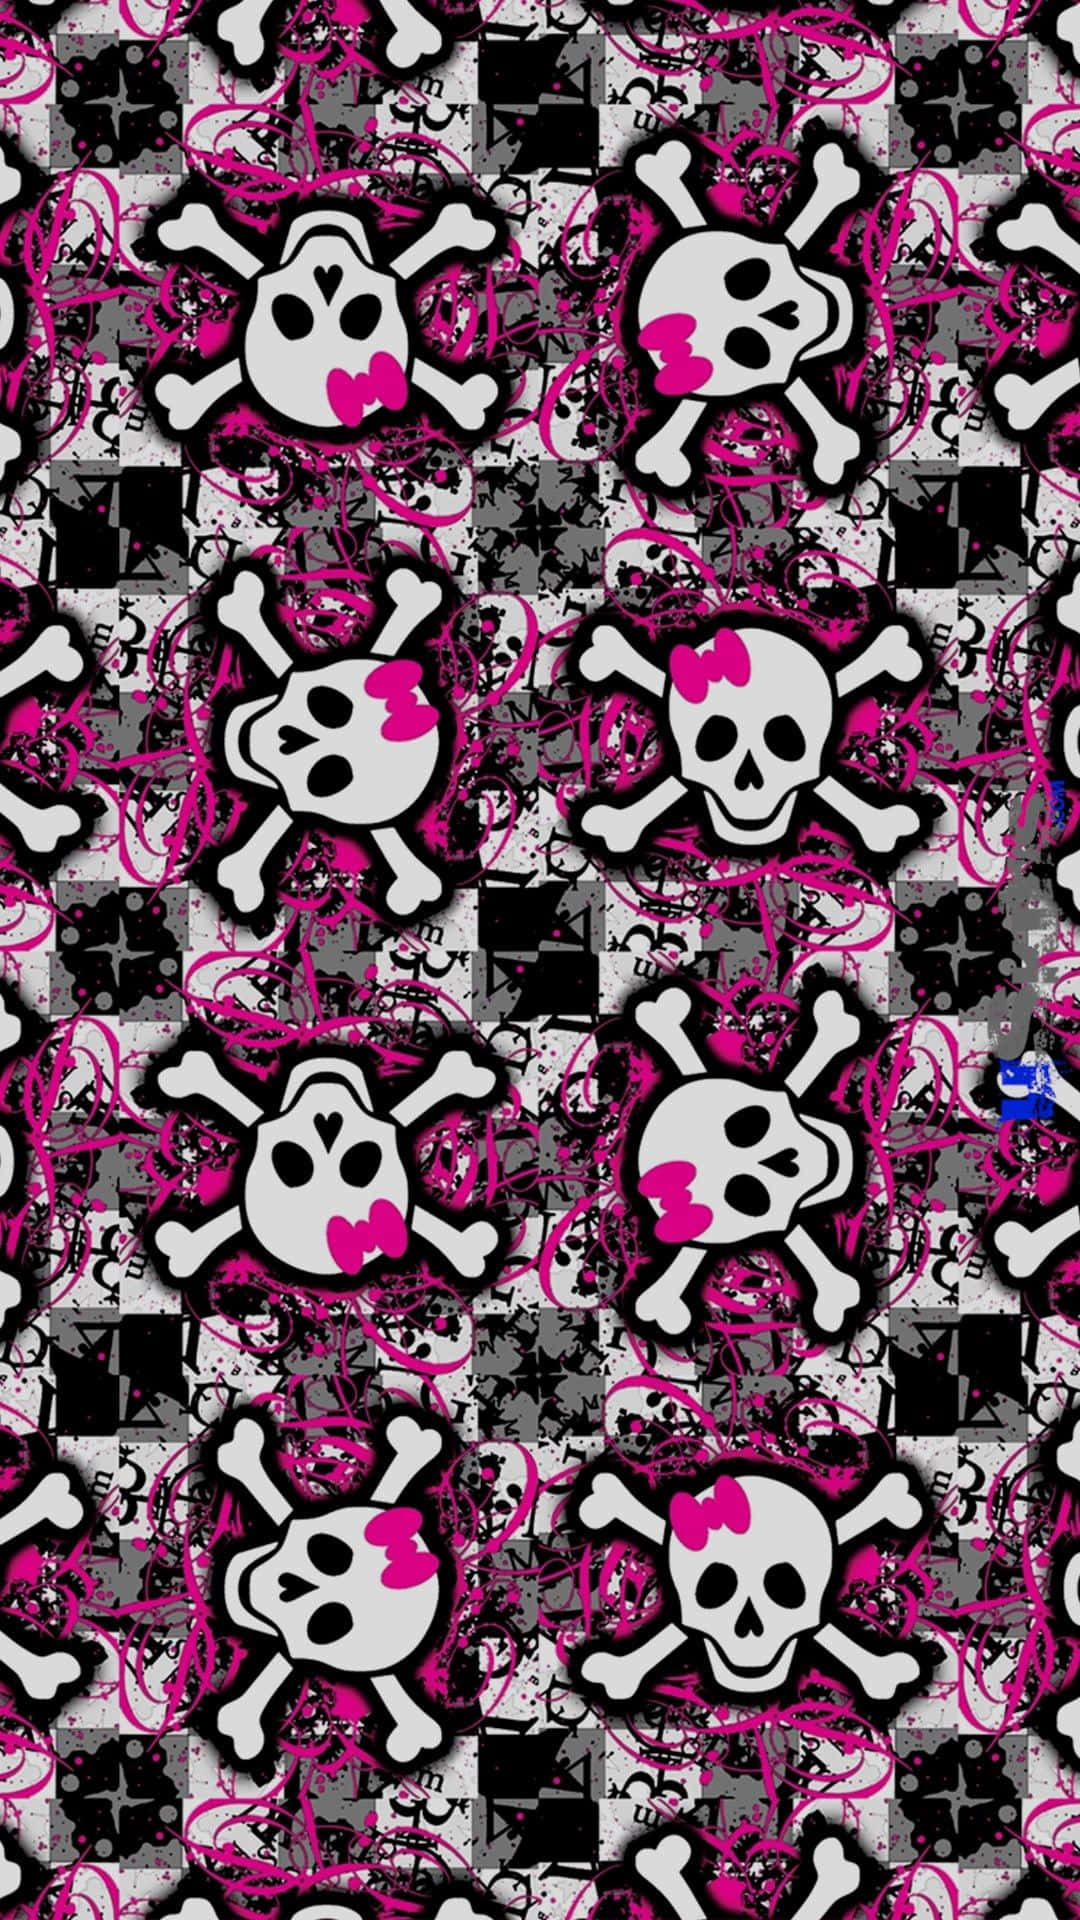 "Exude Coolness With A Pink Skull" Wallpaper